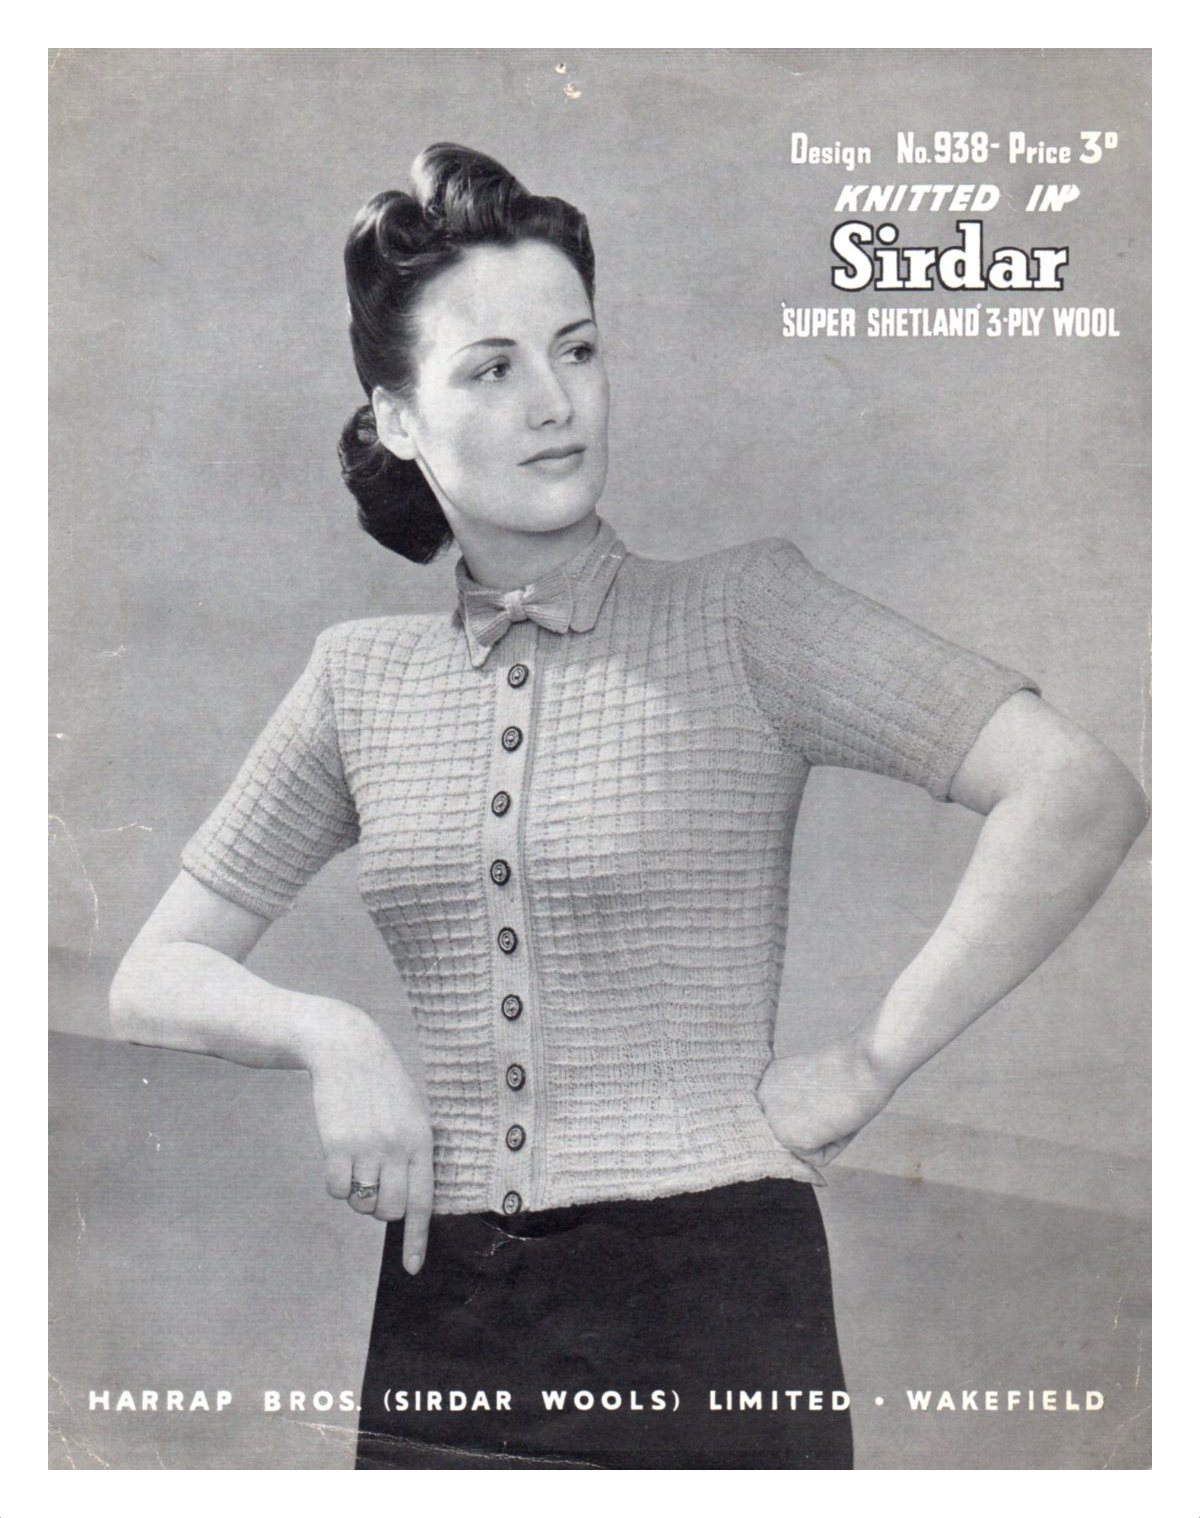 Sirdar cover for 3 ply pattern. :ady wearing cardigan with short sleeves and textured chequerboard pattern.